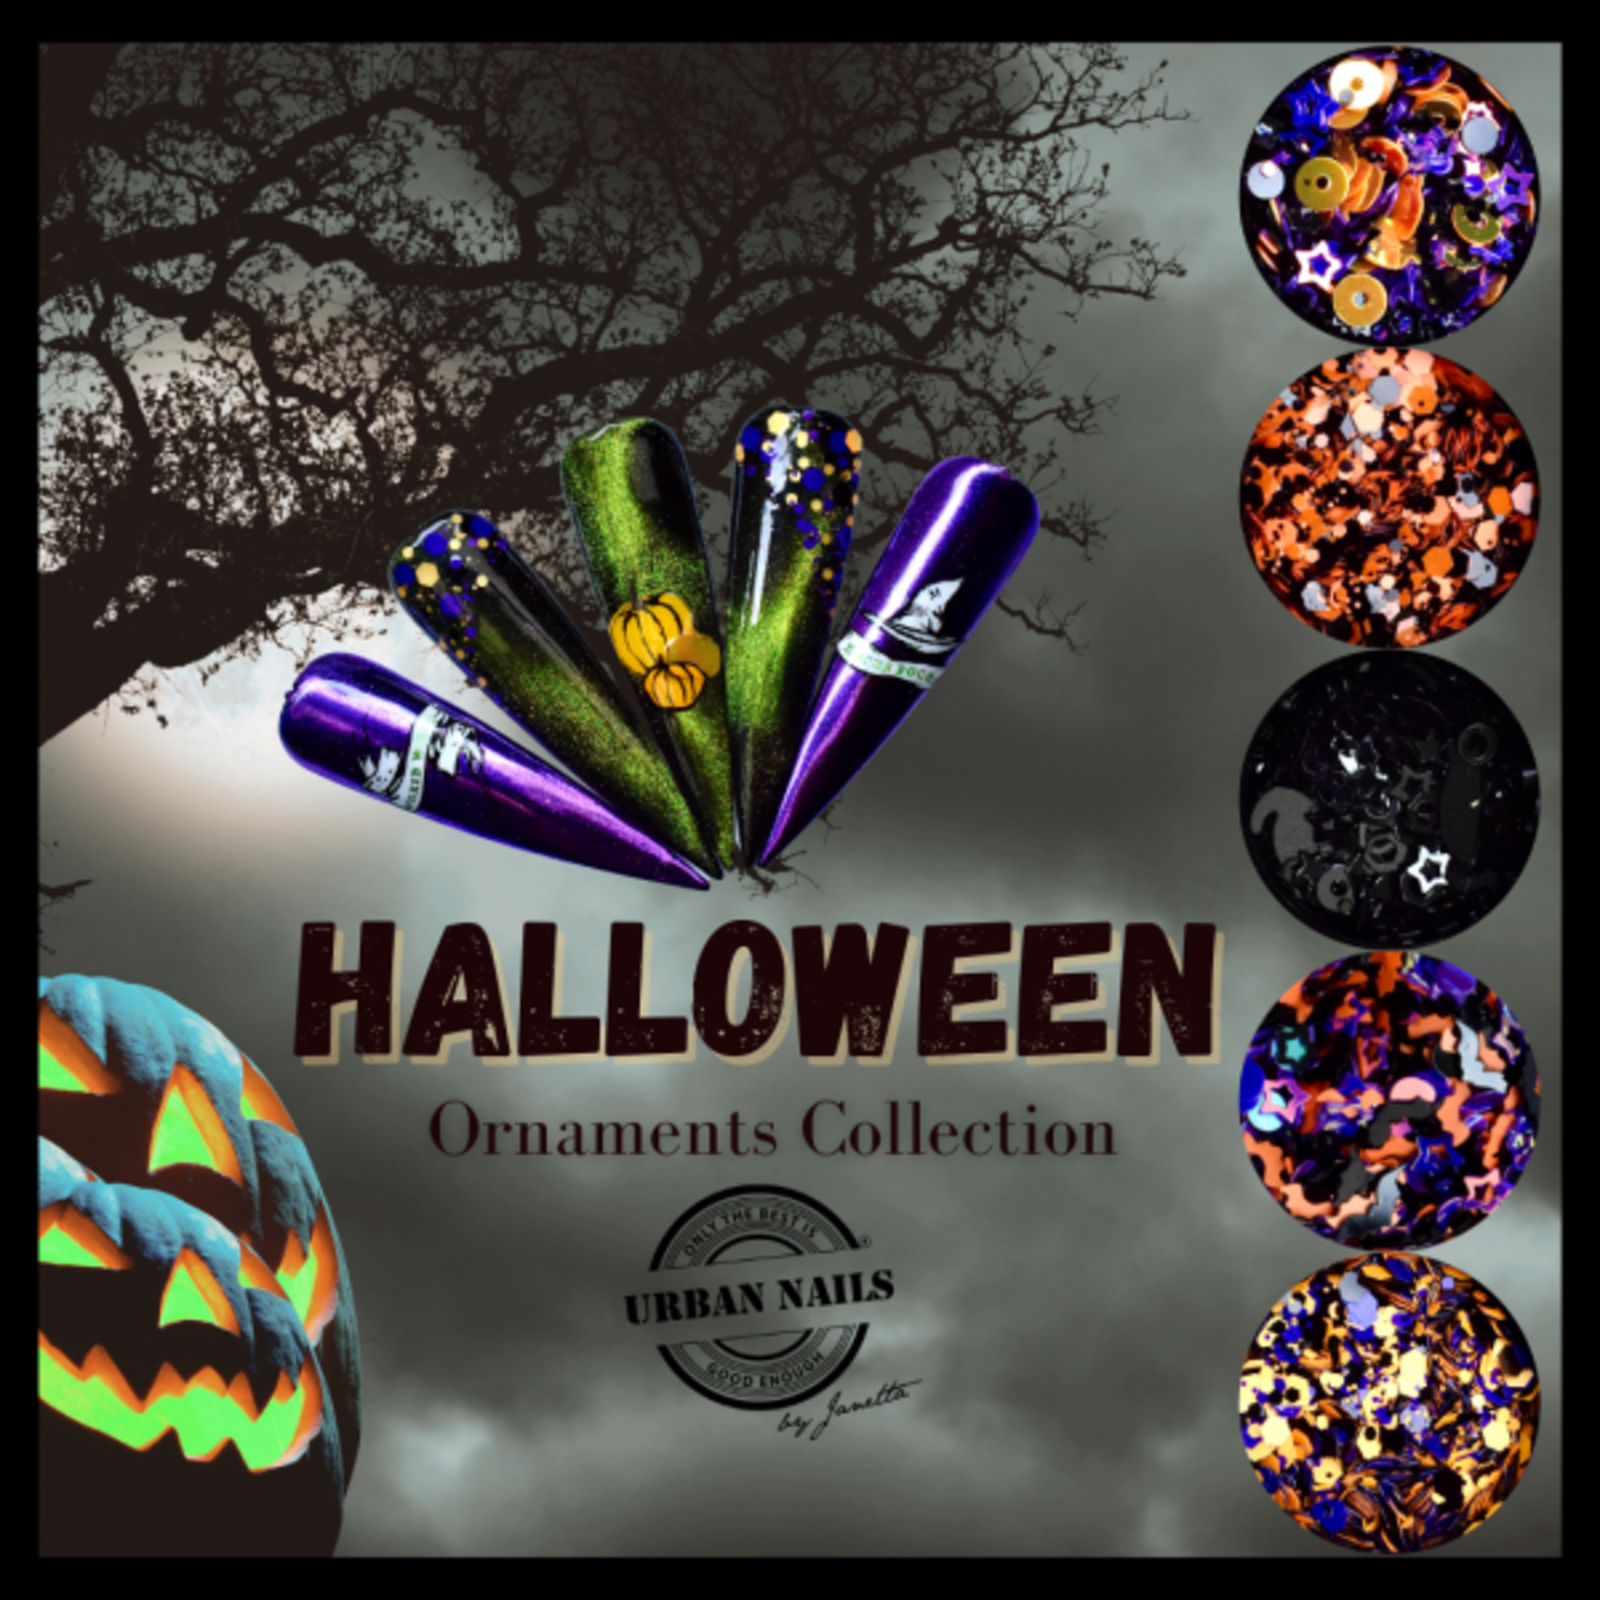 Urban nails Halloween Ornaments Collection